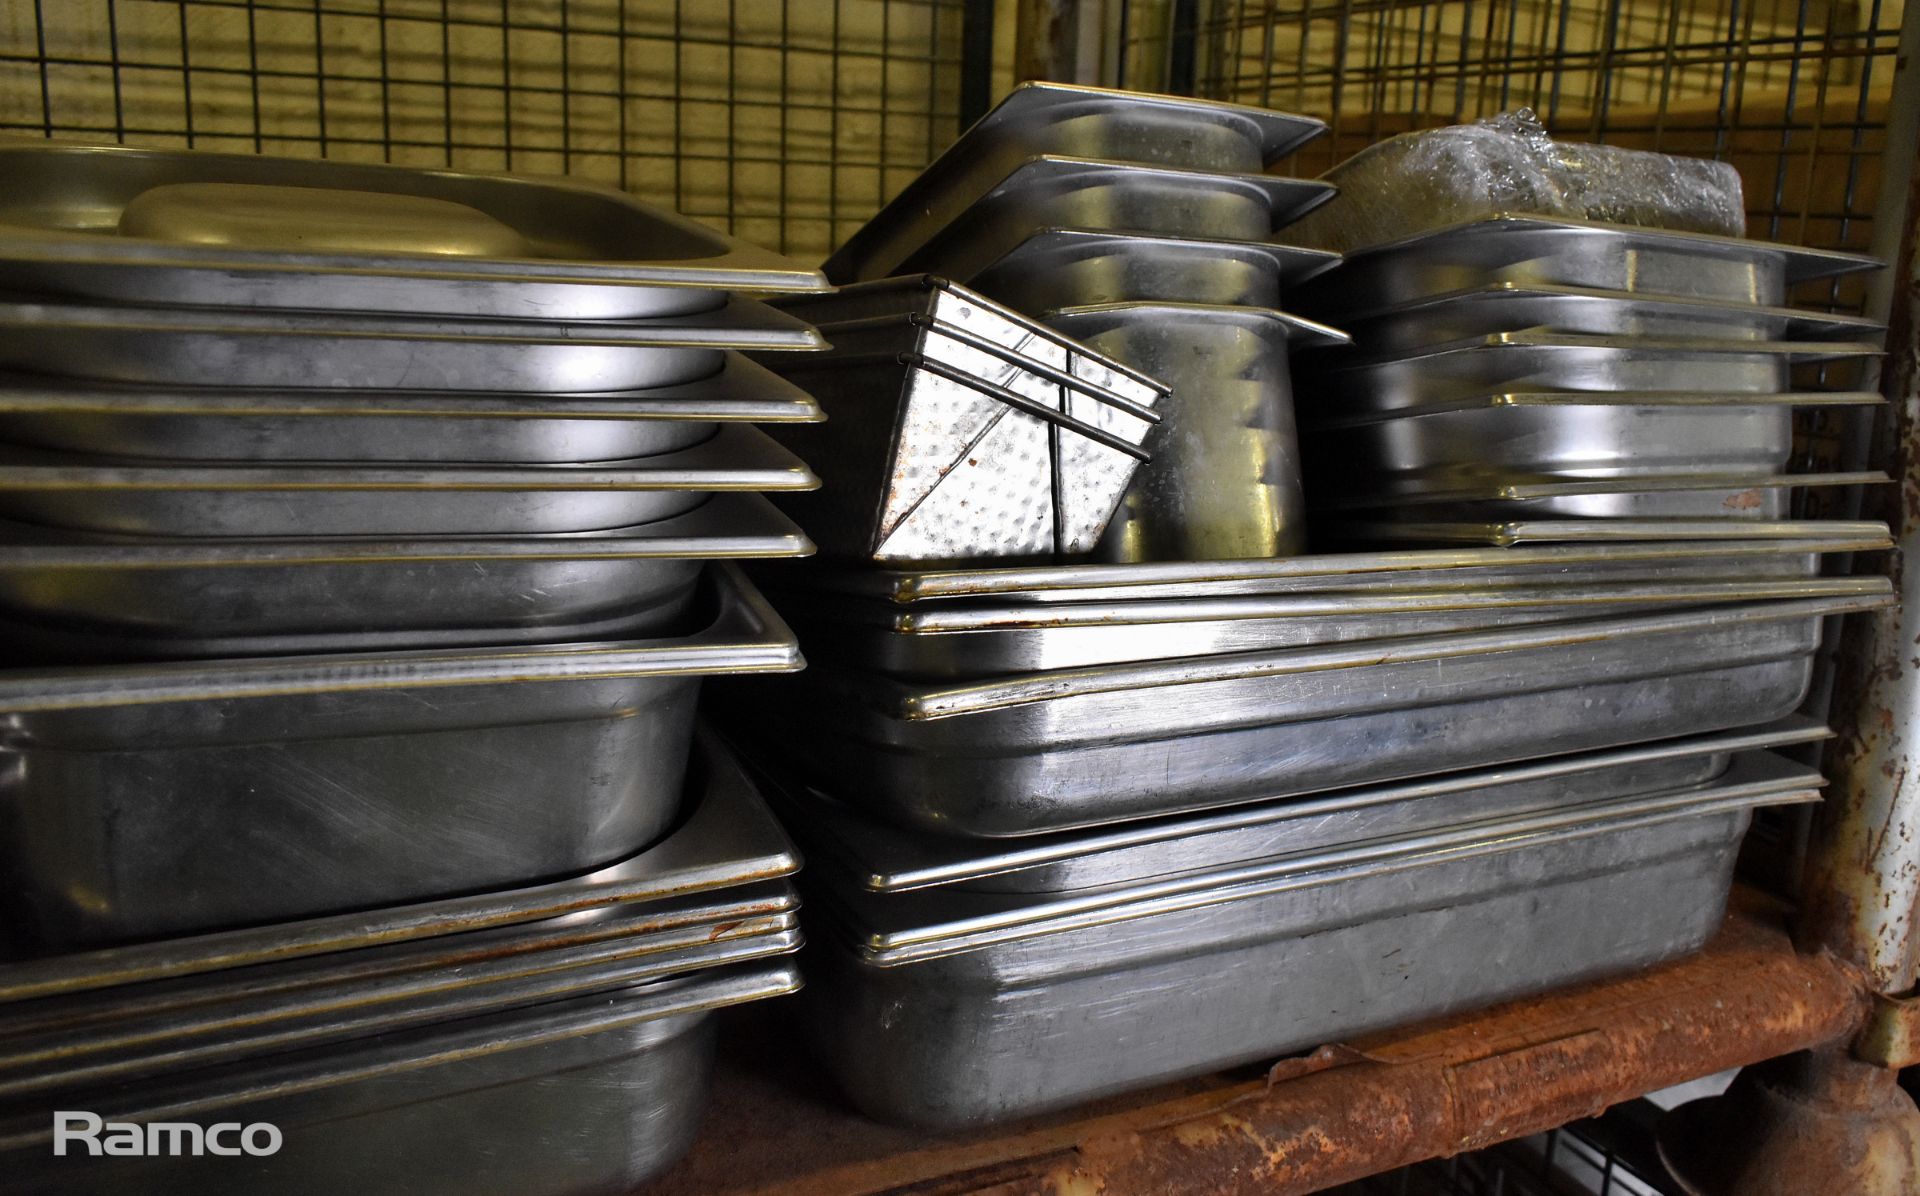 Catering equipment - bain marie trays (multiple sizes), serving trays, oven trays - Image 3 of 6